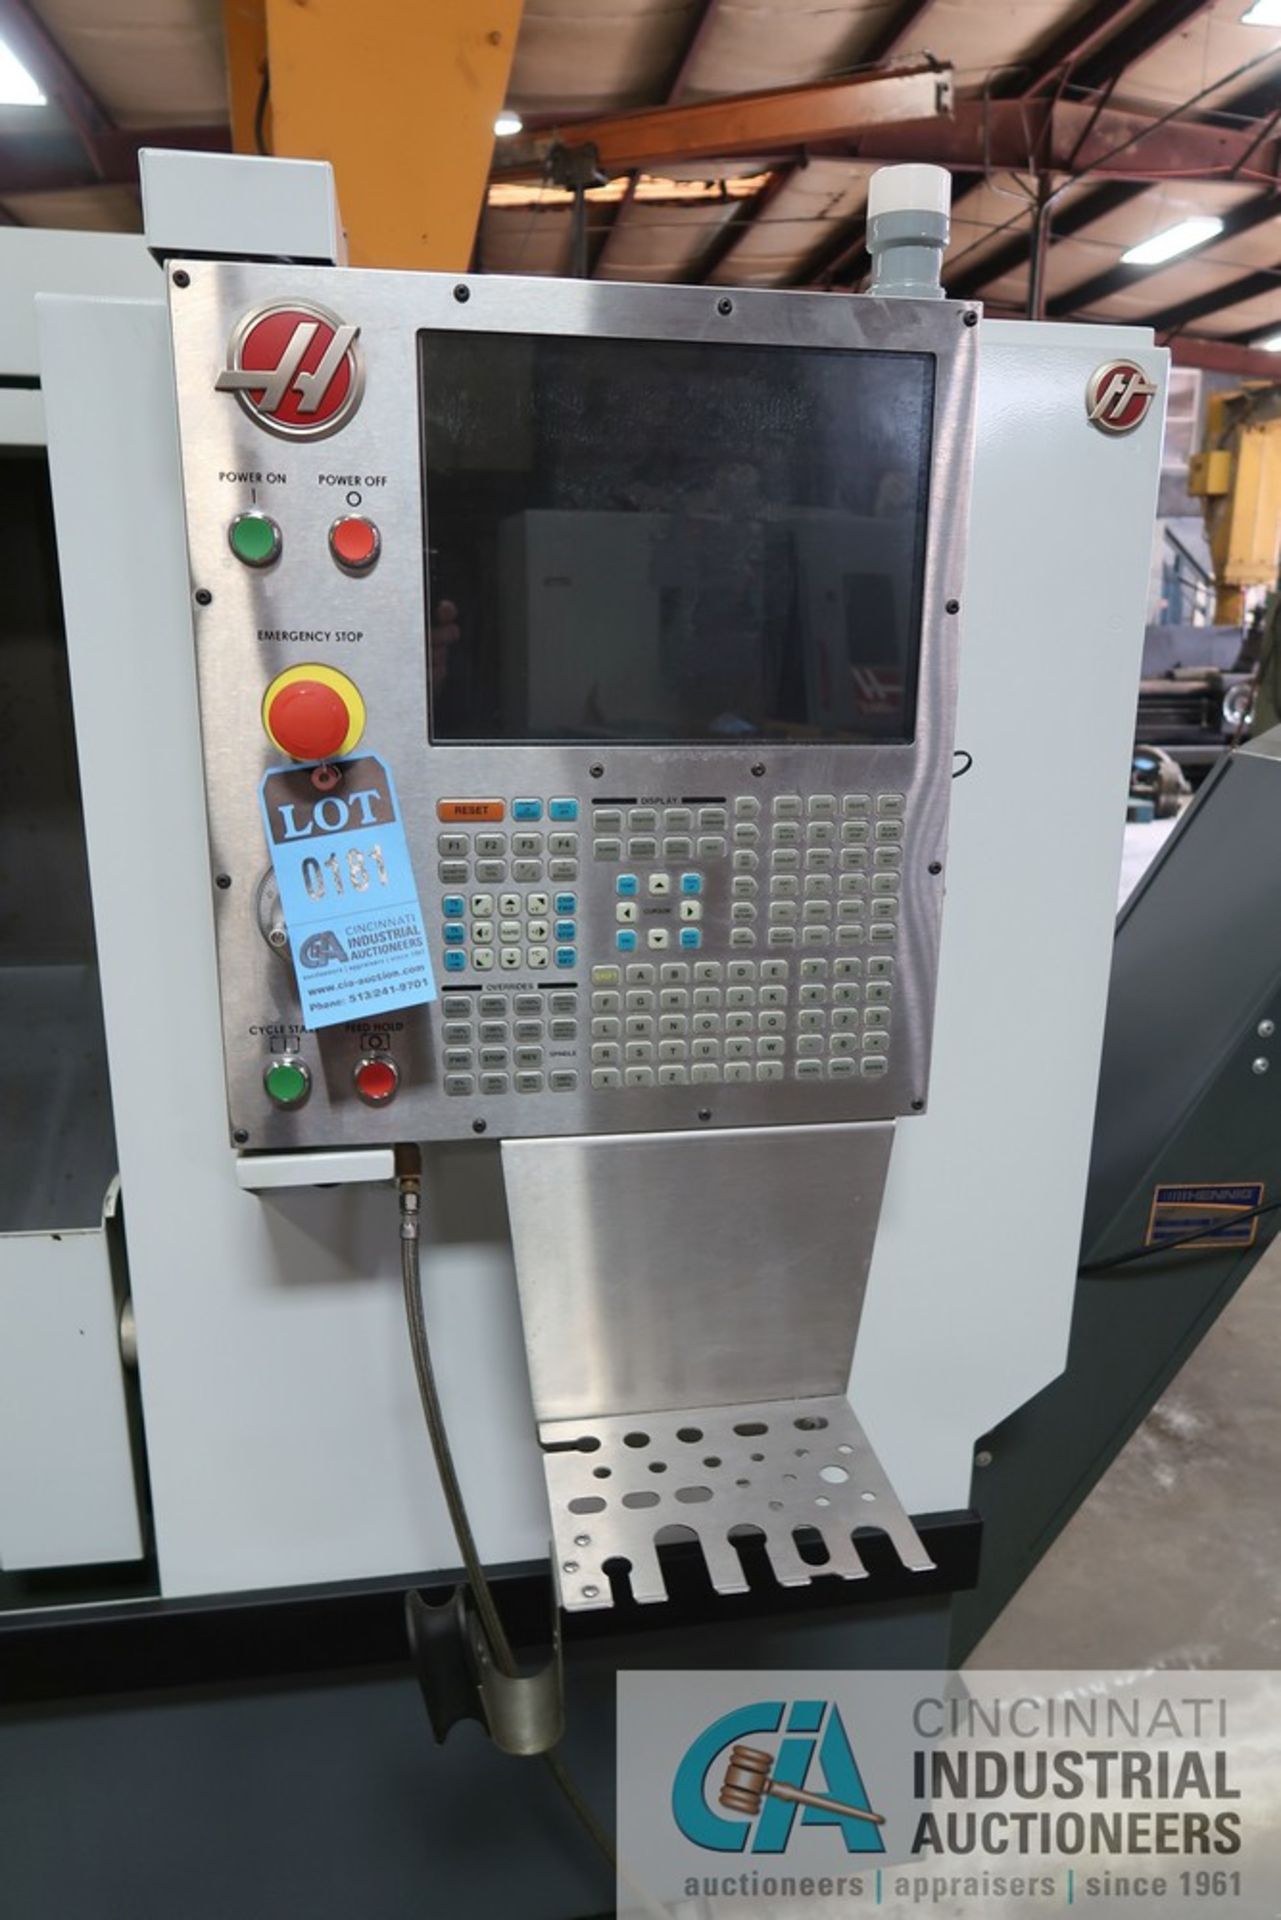 HAAS MODEL ST10 CNC TURNING CENTER; S/N 3108101, COLLET CHUCK, 12-POSITION TURRET, TOOL PRESETTER, - Image 3 of 10